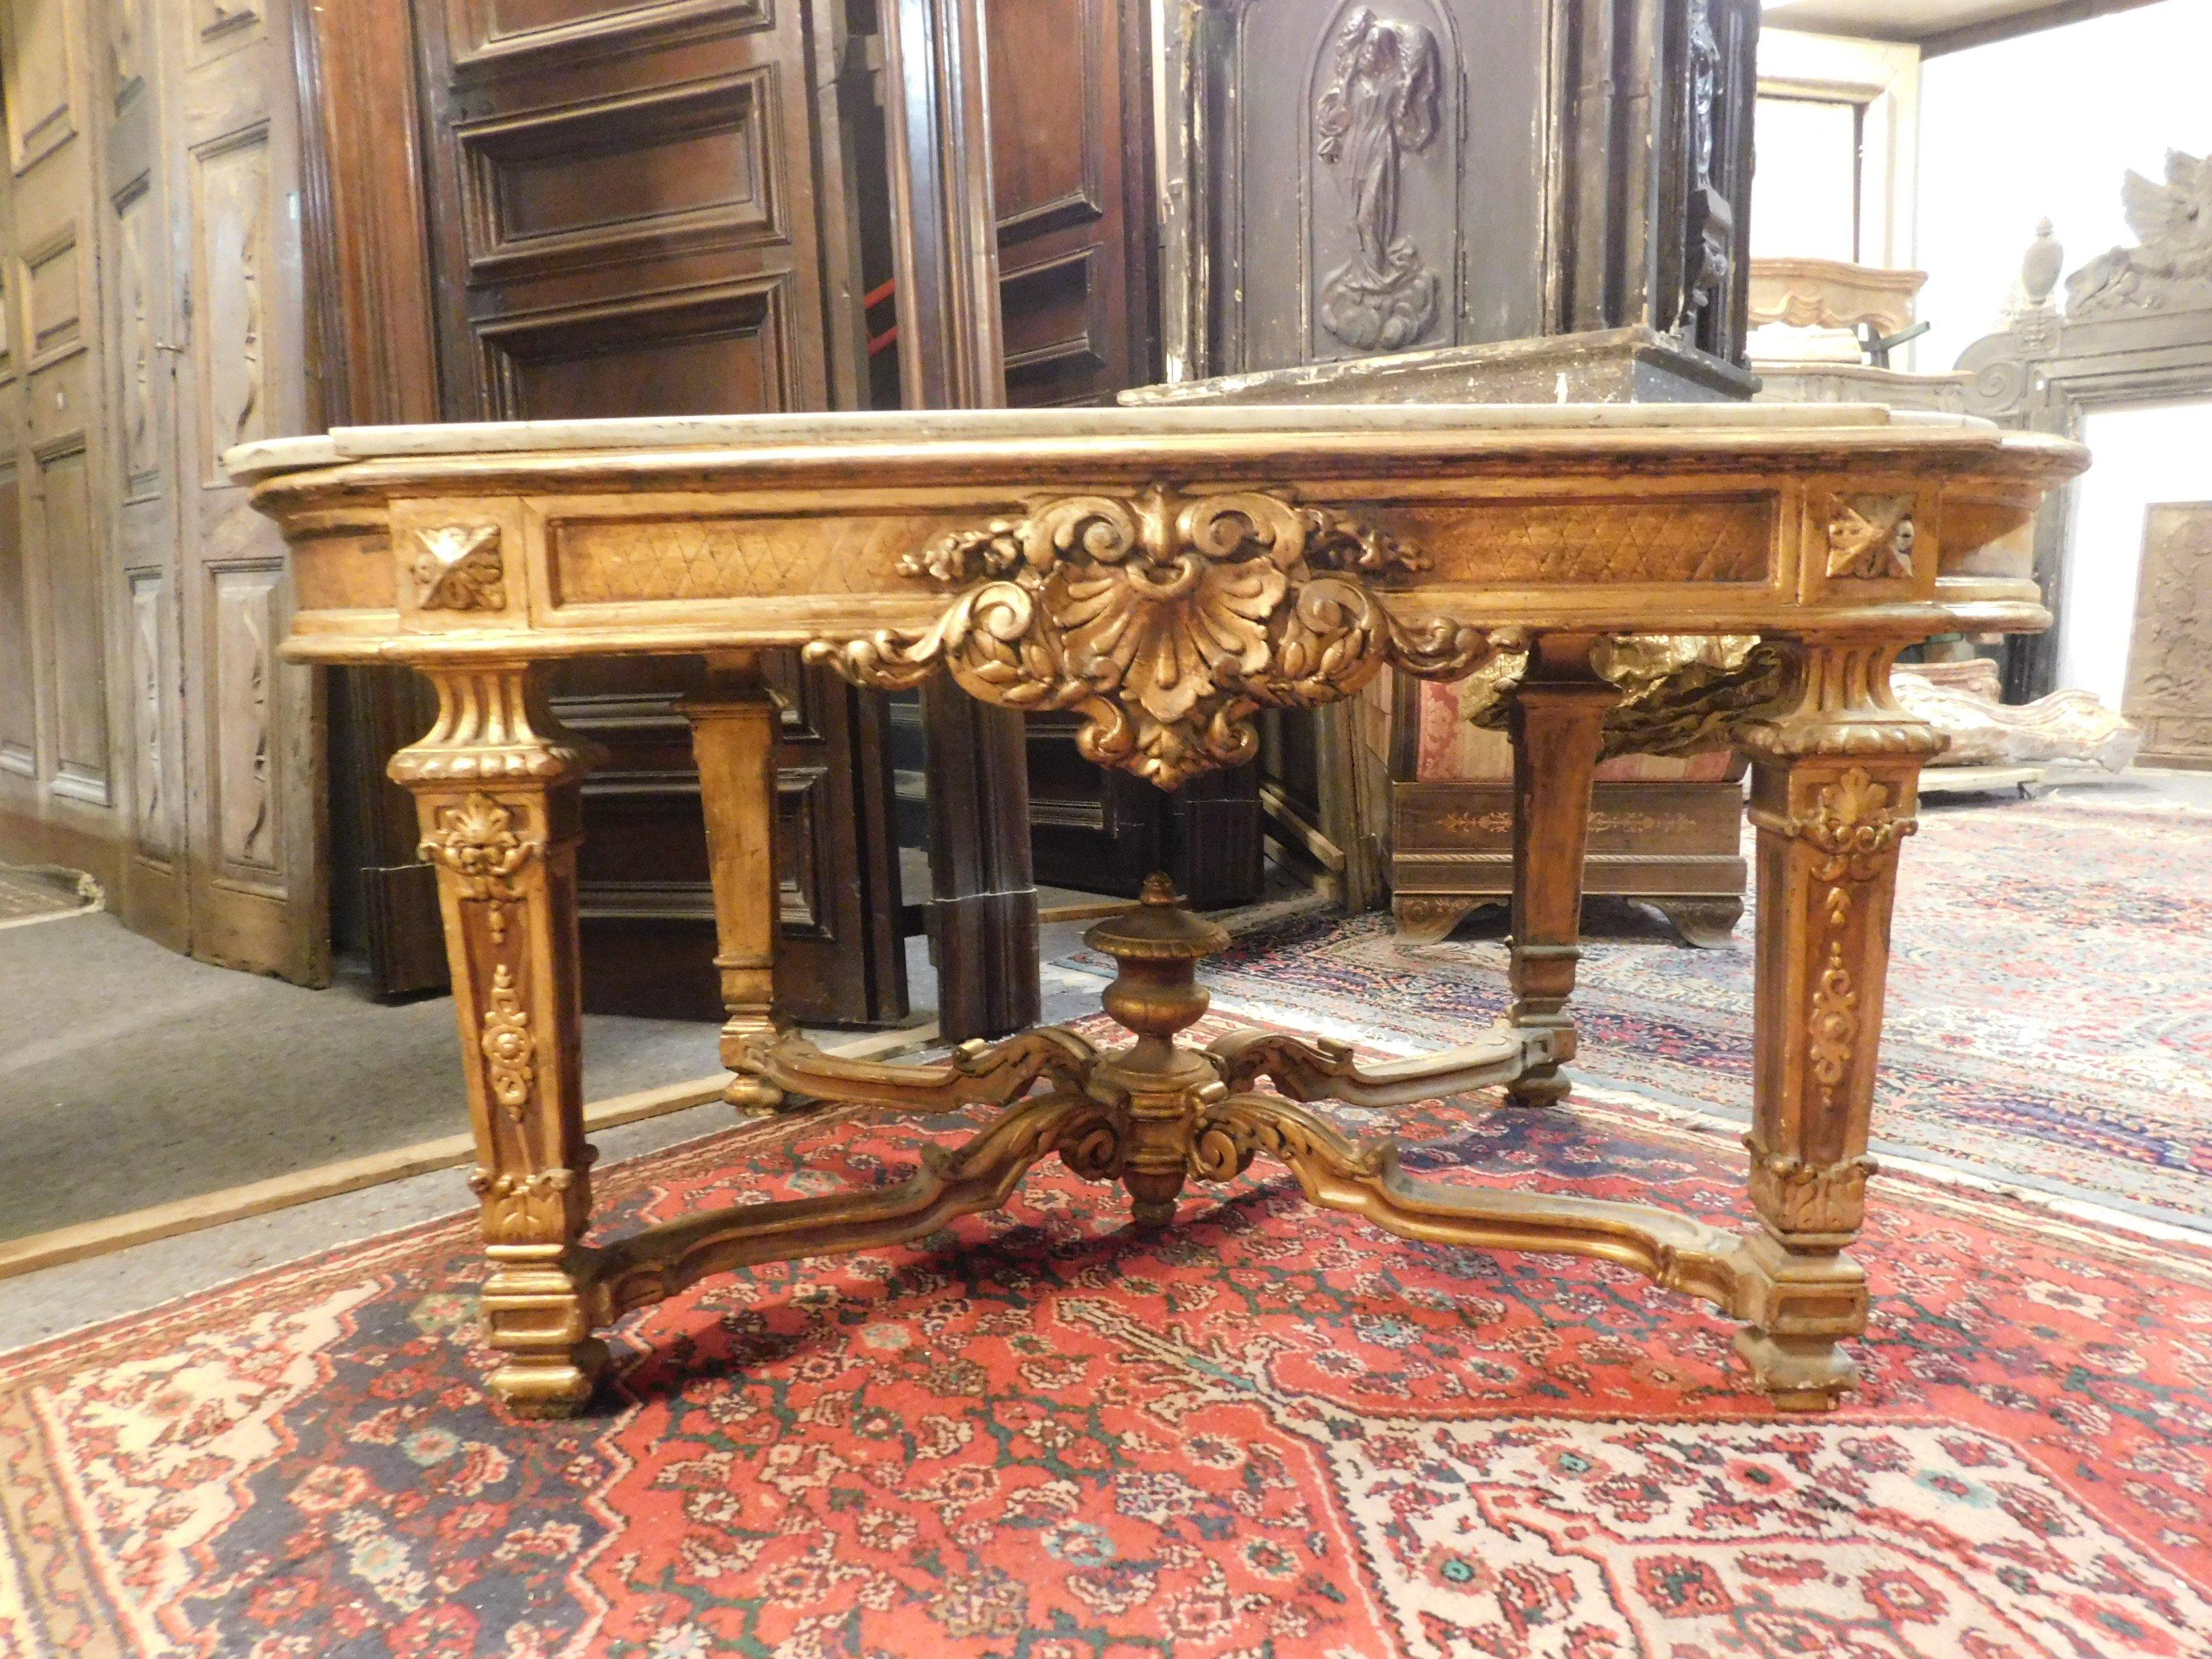 Antique center table, console carved on all 4 sides, gilded with leaf, typical Louis XV floral motifs, white Carrara marble top, 18th century, from an elegant residence in northern Italy.
Very charming, of great value and quality, excellent